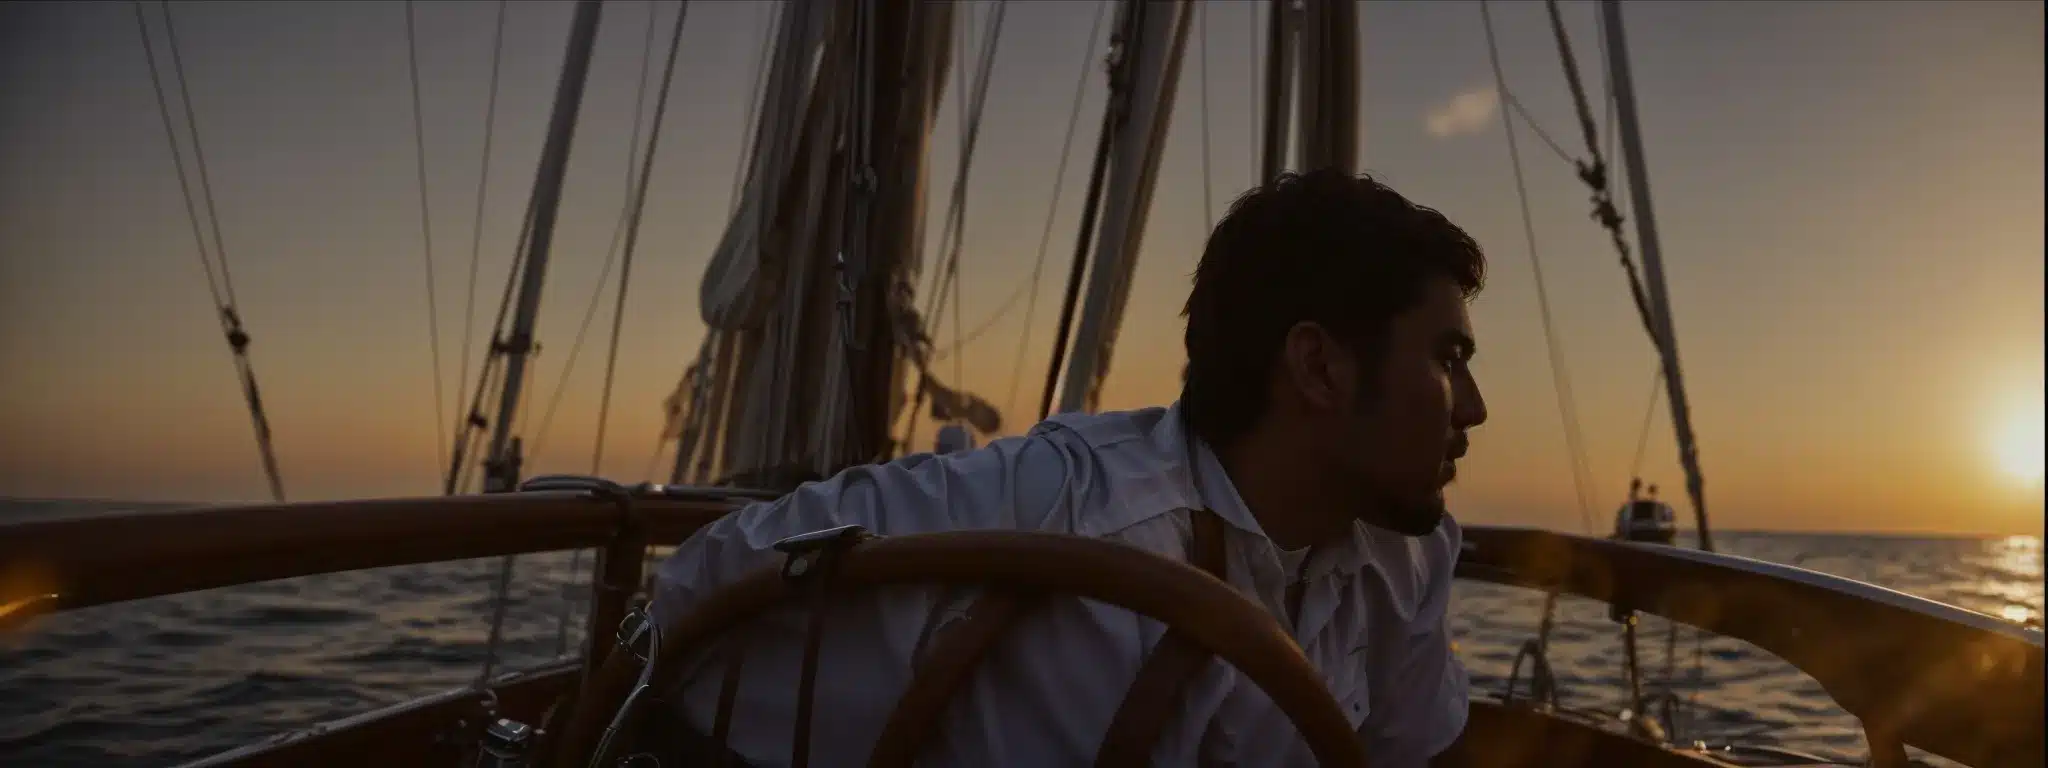 A Captain Stands At The Helm Of A Majestic Sailboat, Steering Towards A Horizon Aglow With The Golden Light Of Sunset.